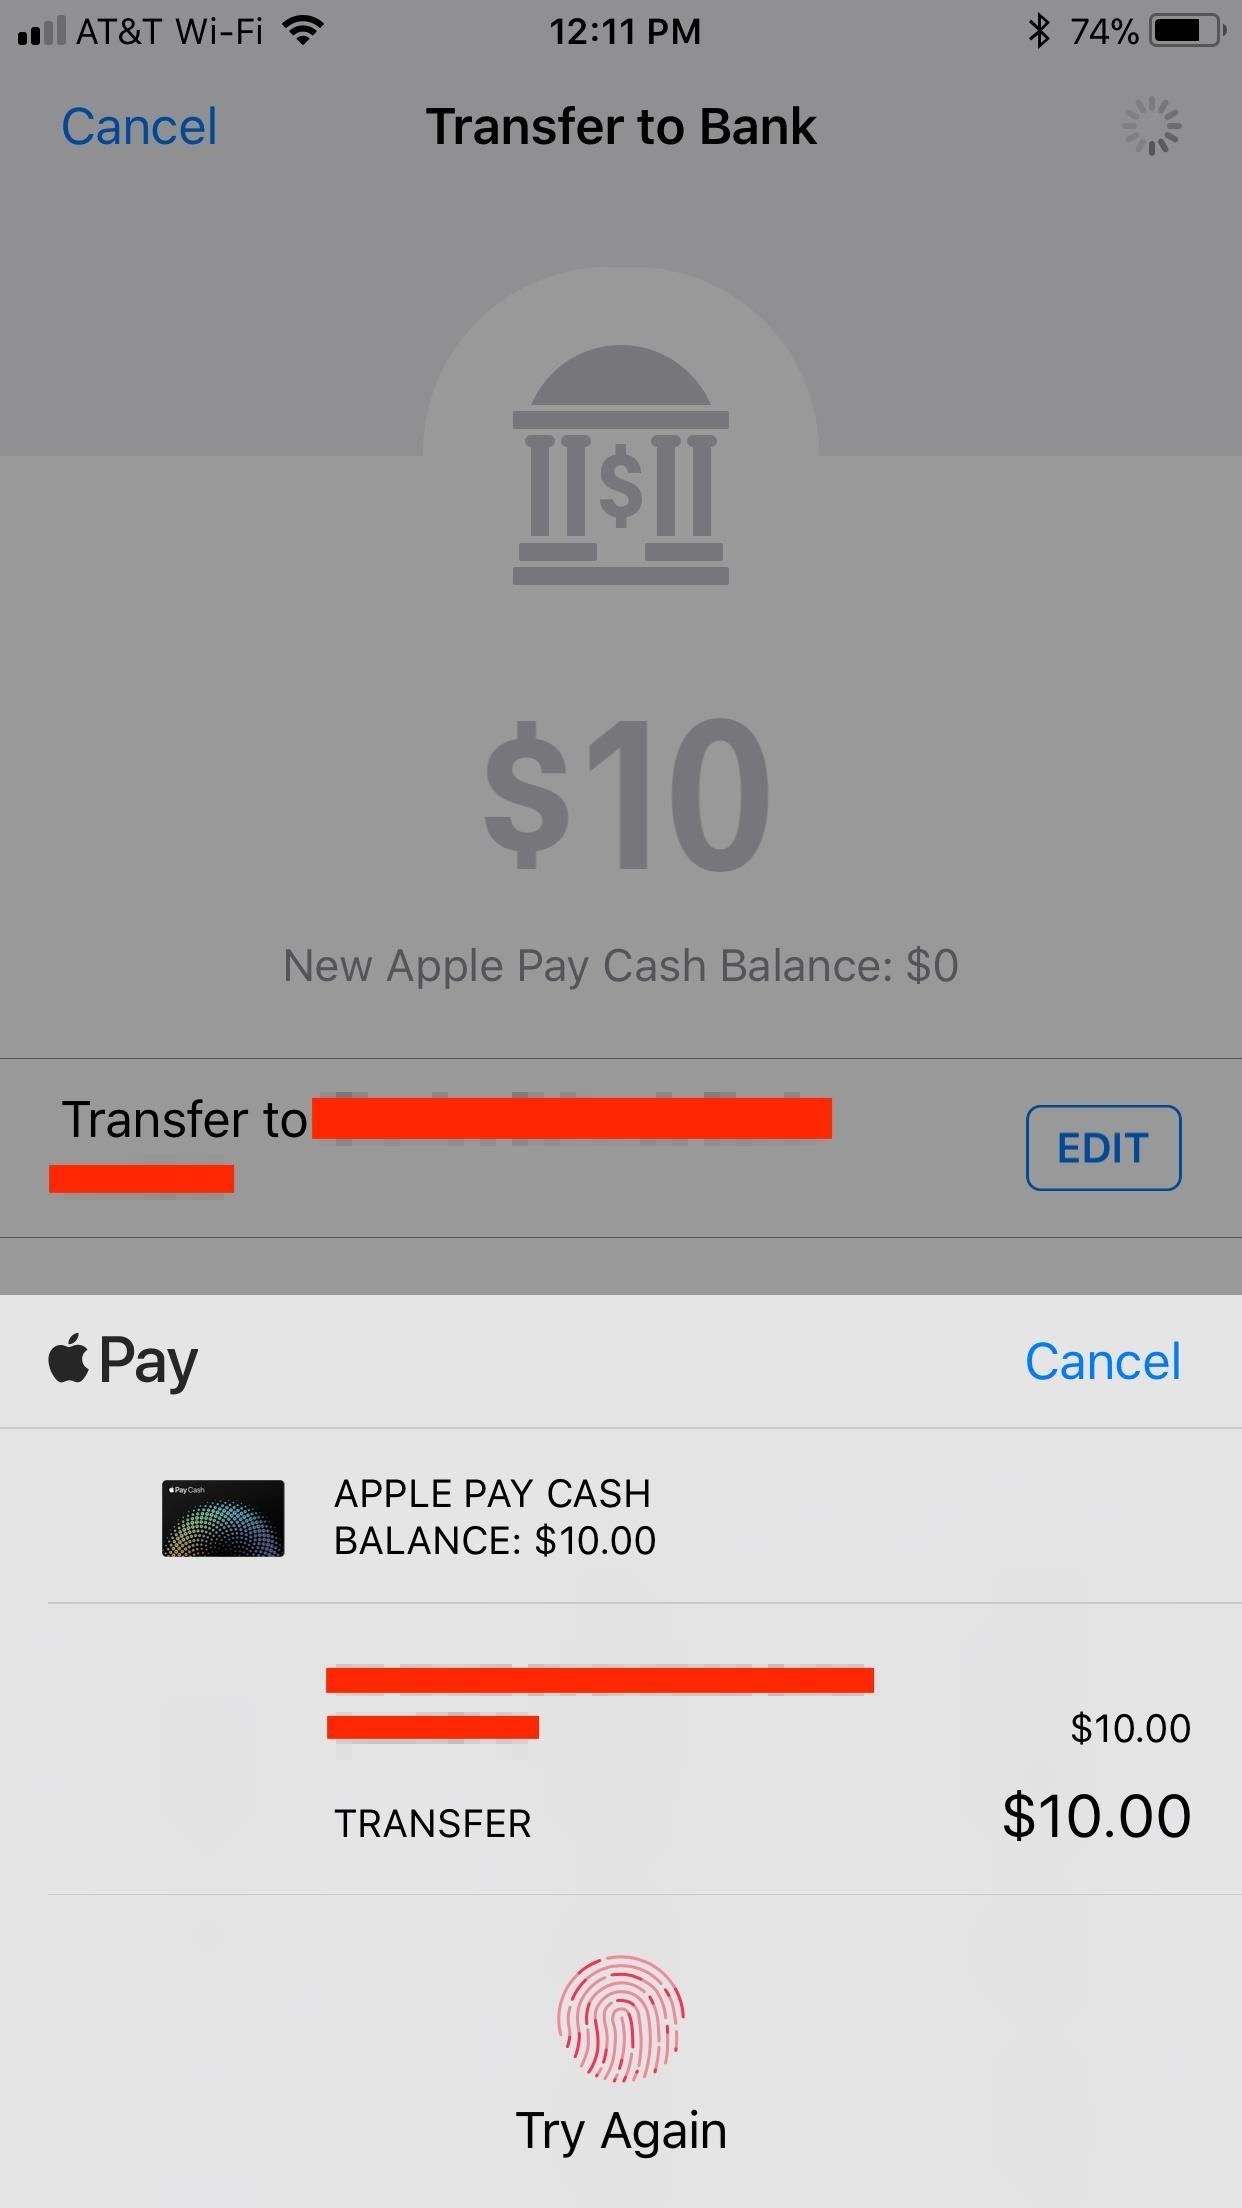 Apple Pay Cash 101: How to Transfer Money from Your Card to Your Bank Account